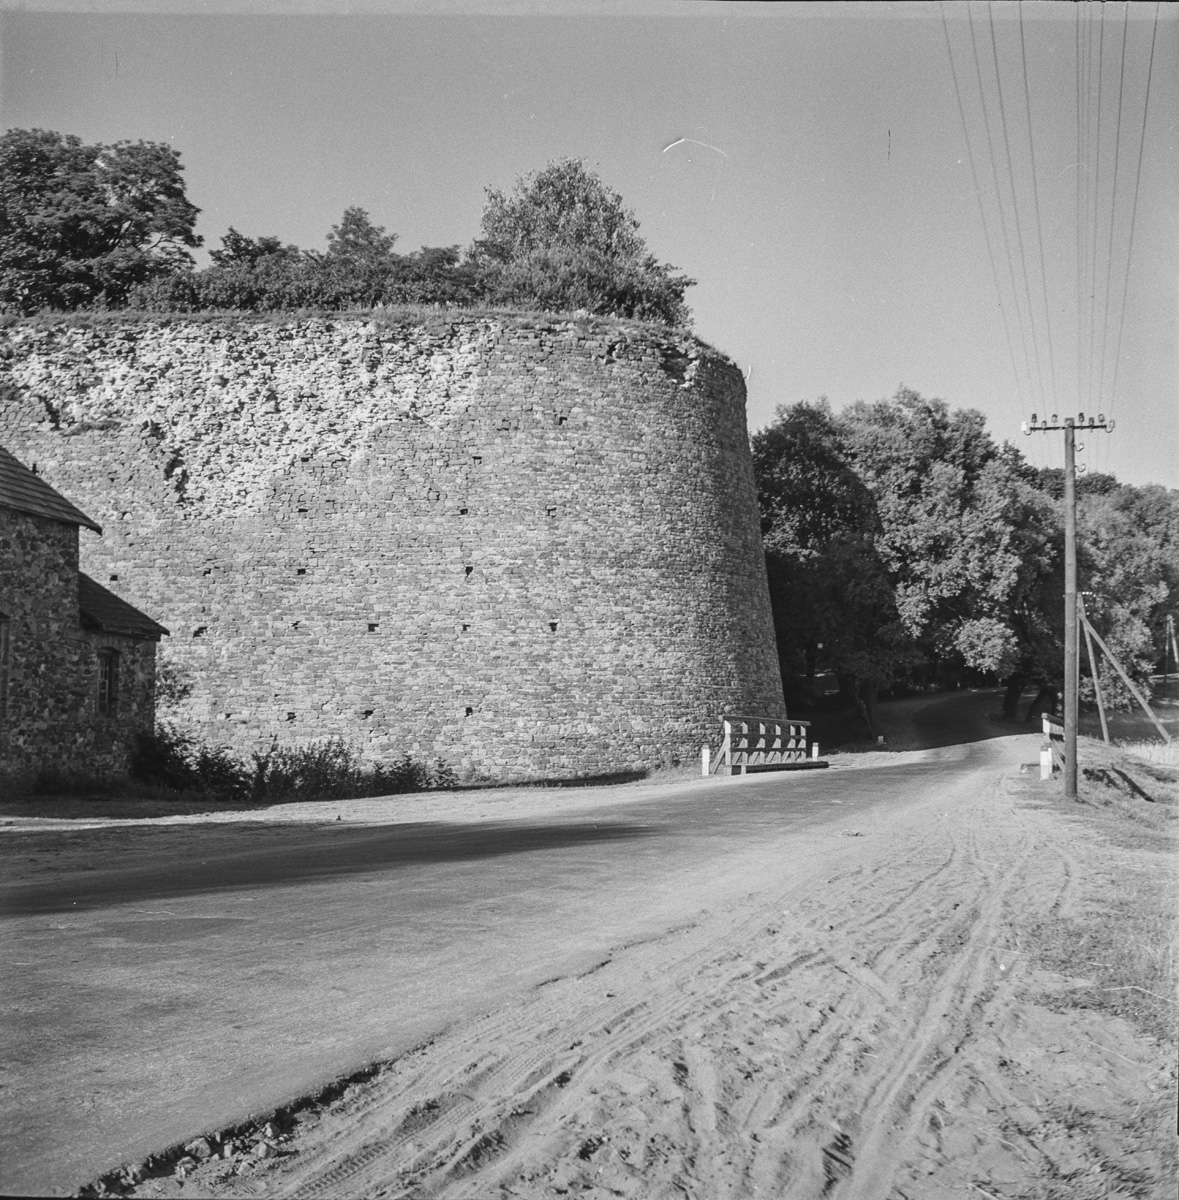 View of the retaining wall from the roadside